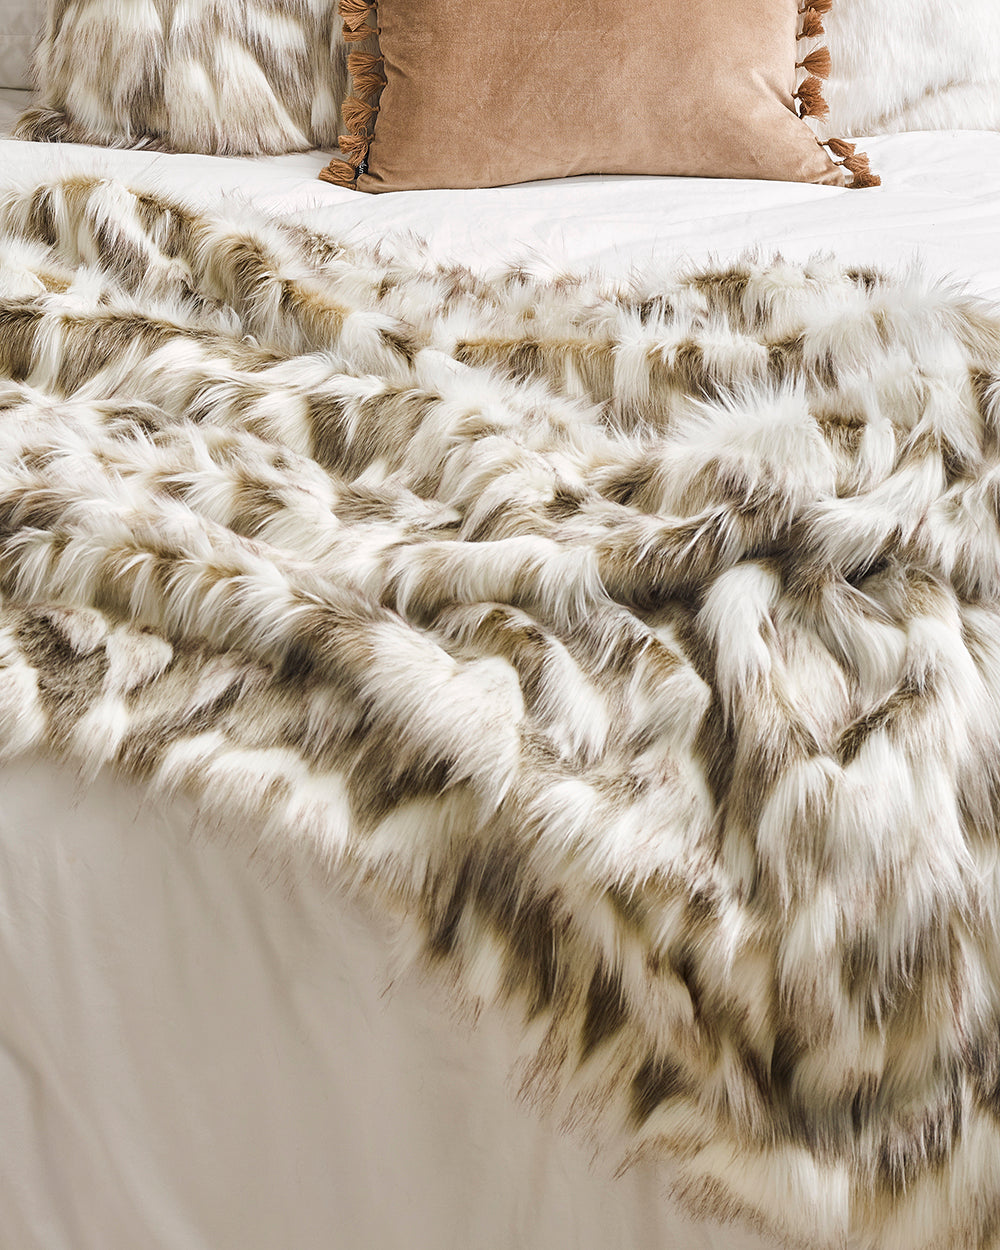 Heirloom Snowshoe Hare Throw Rug Blanket in Faux Fur is available from Make Your House A Home Premium Stockist. Furniture Store Bendigo, Victoria. Australia Wide Delivery.